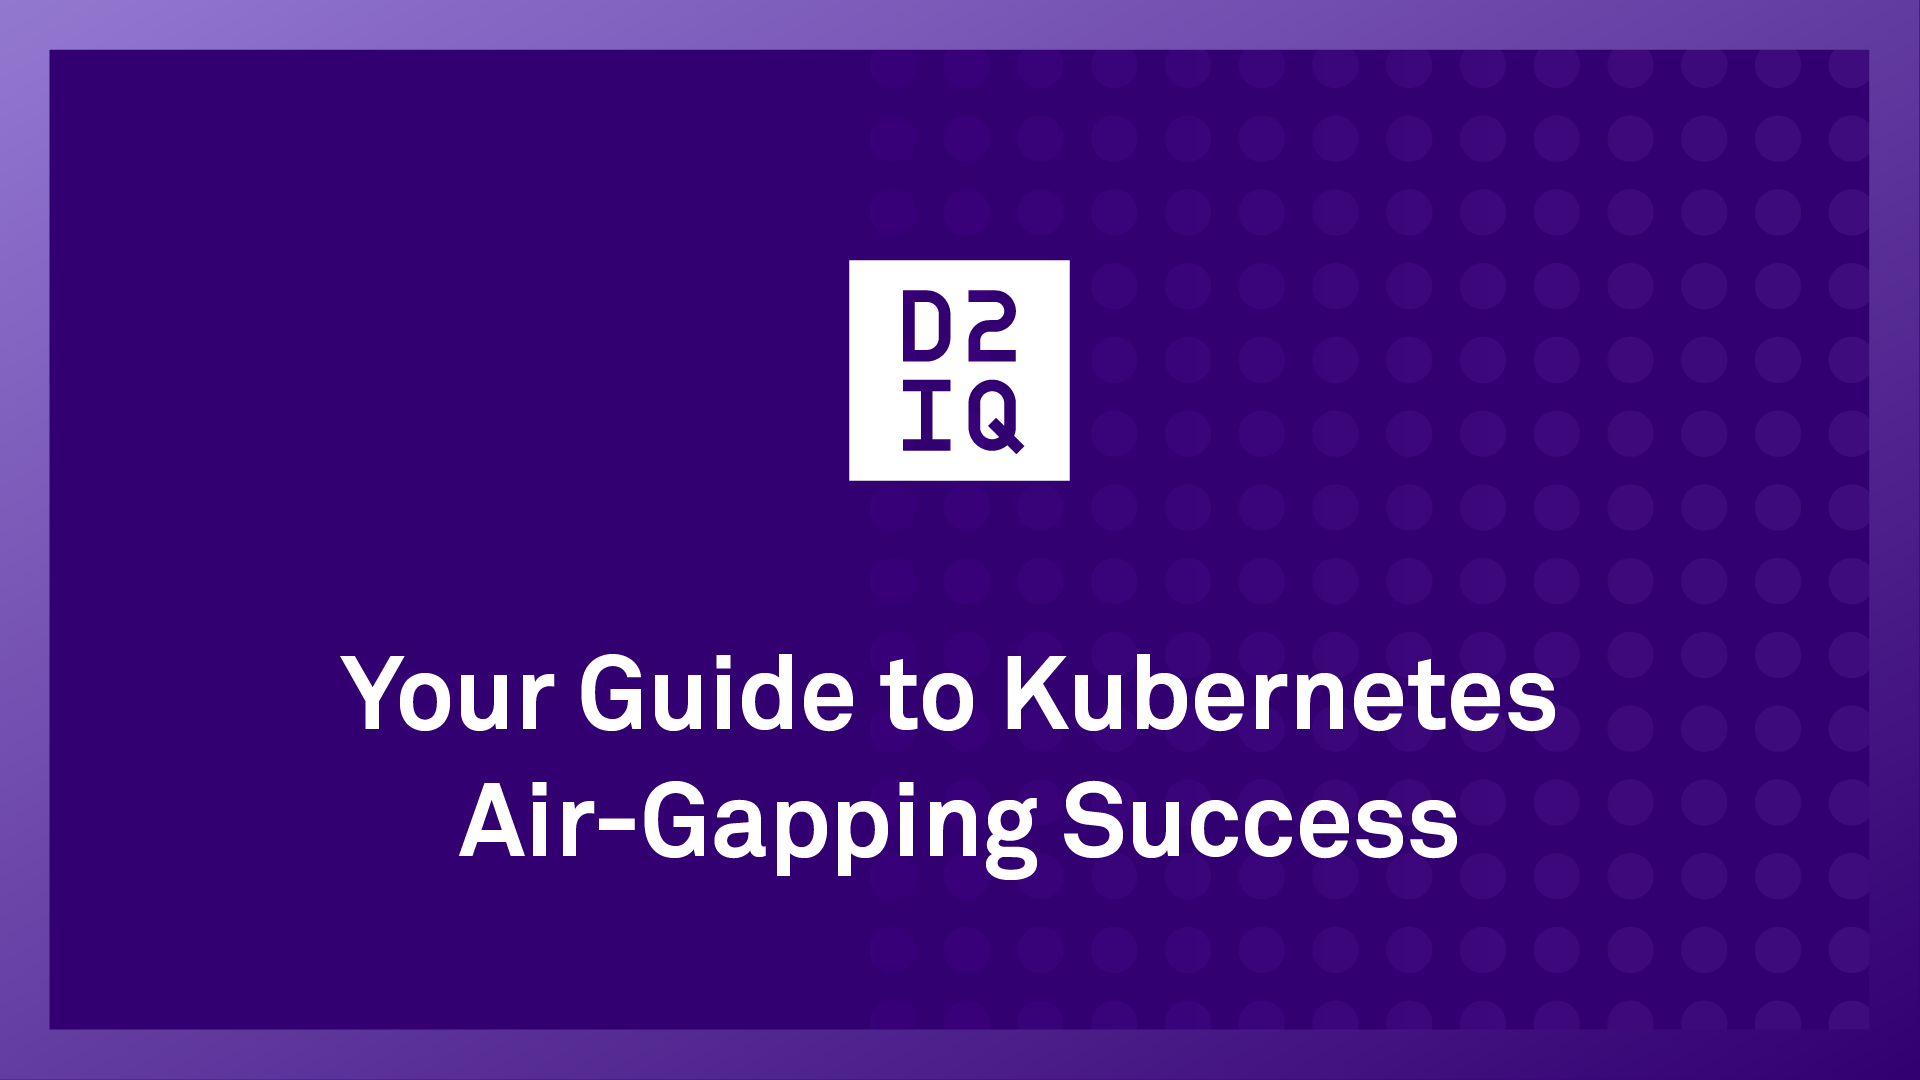 Your Guide to Kubernetes Air-Gapping Success